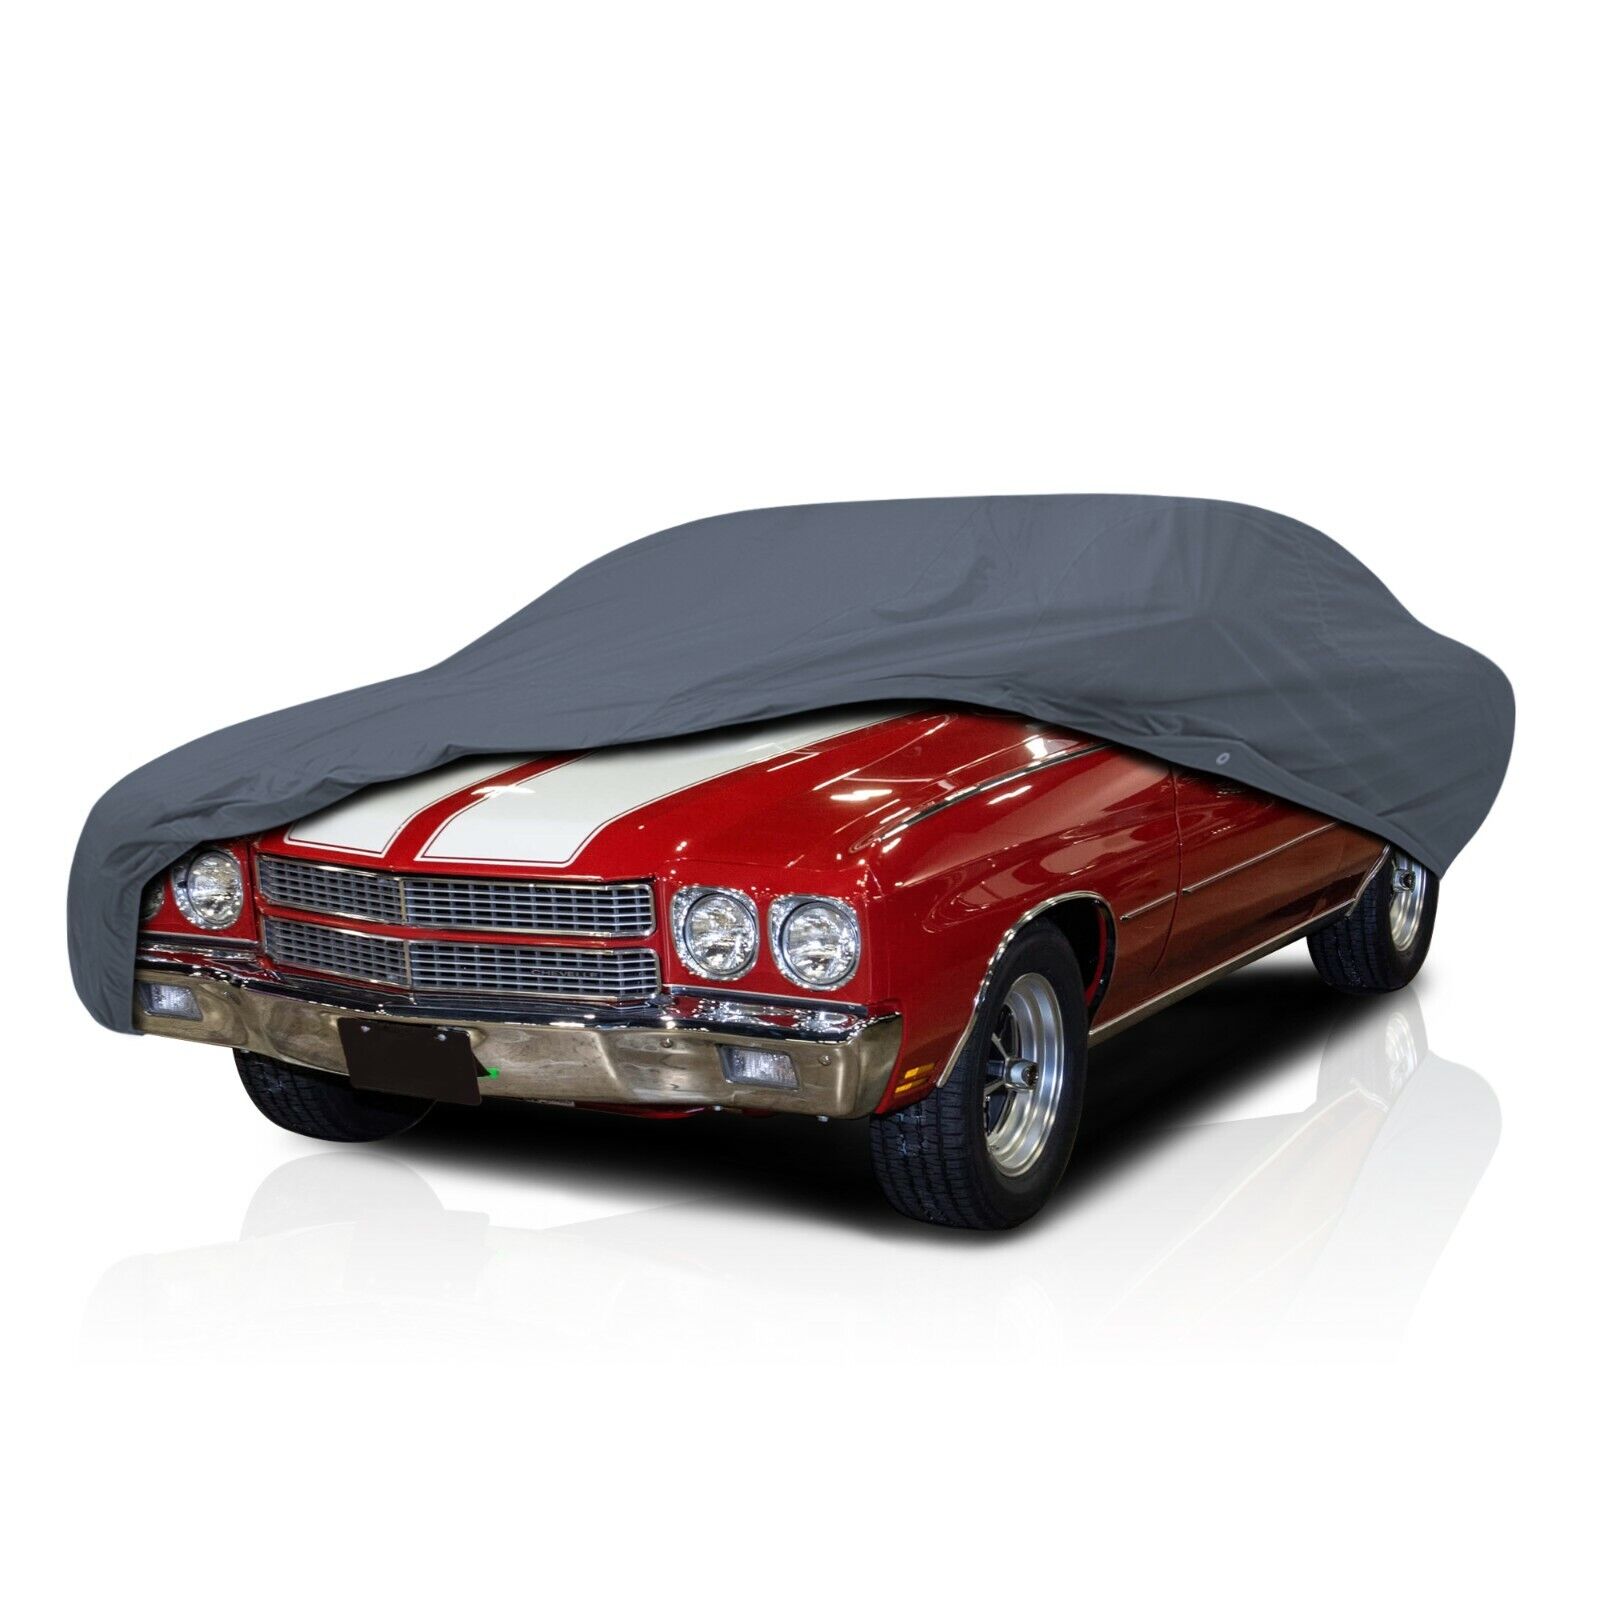 [CCT] 5 Layer Semi-Custom Fit Full Car Cover For Chevy Chevelle [1968-1972]